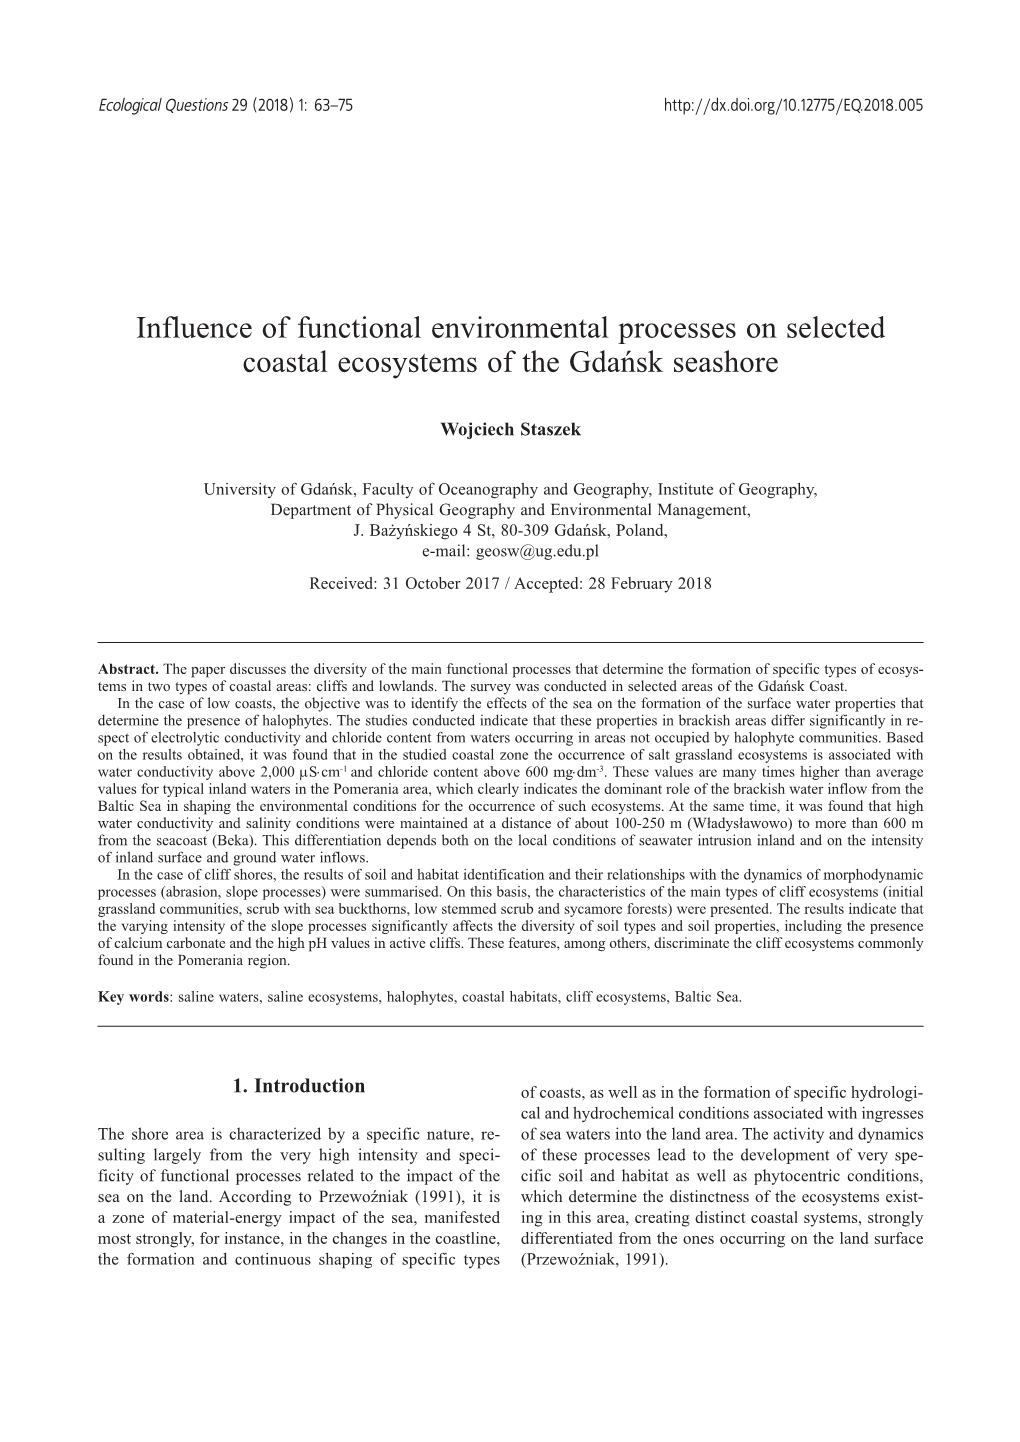 Influence of Functional Environmental Processes on Selected Coastal Ecosystems of the Gdańsn Seashore